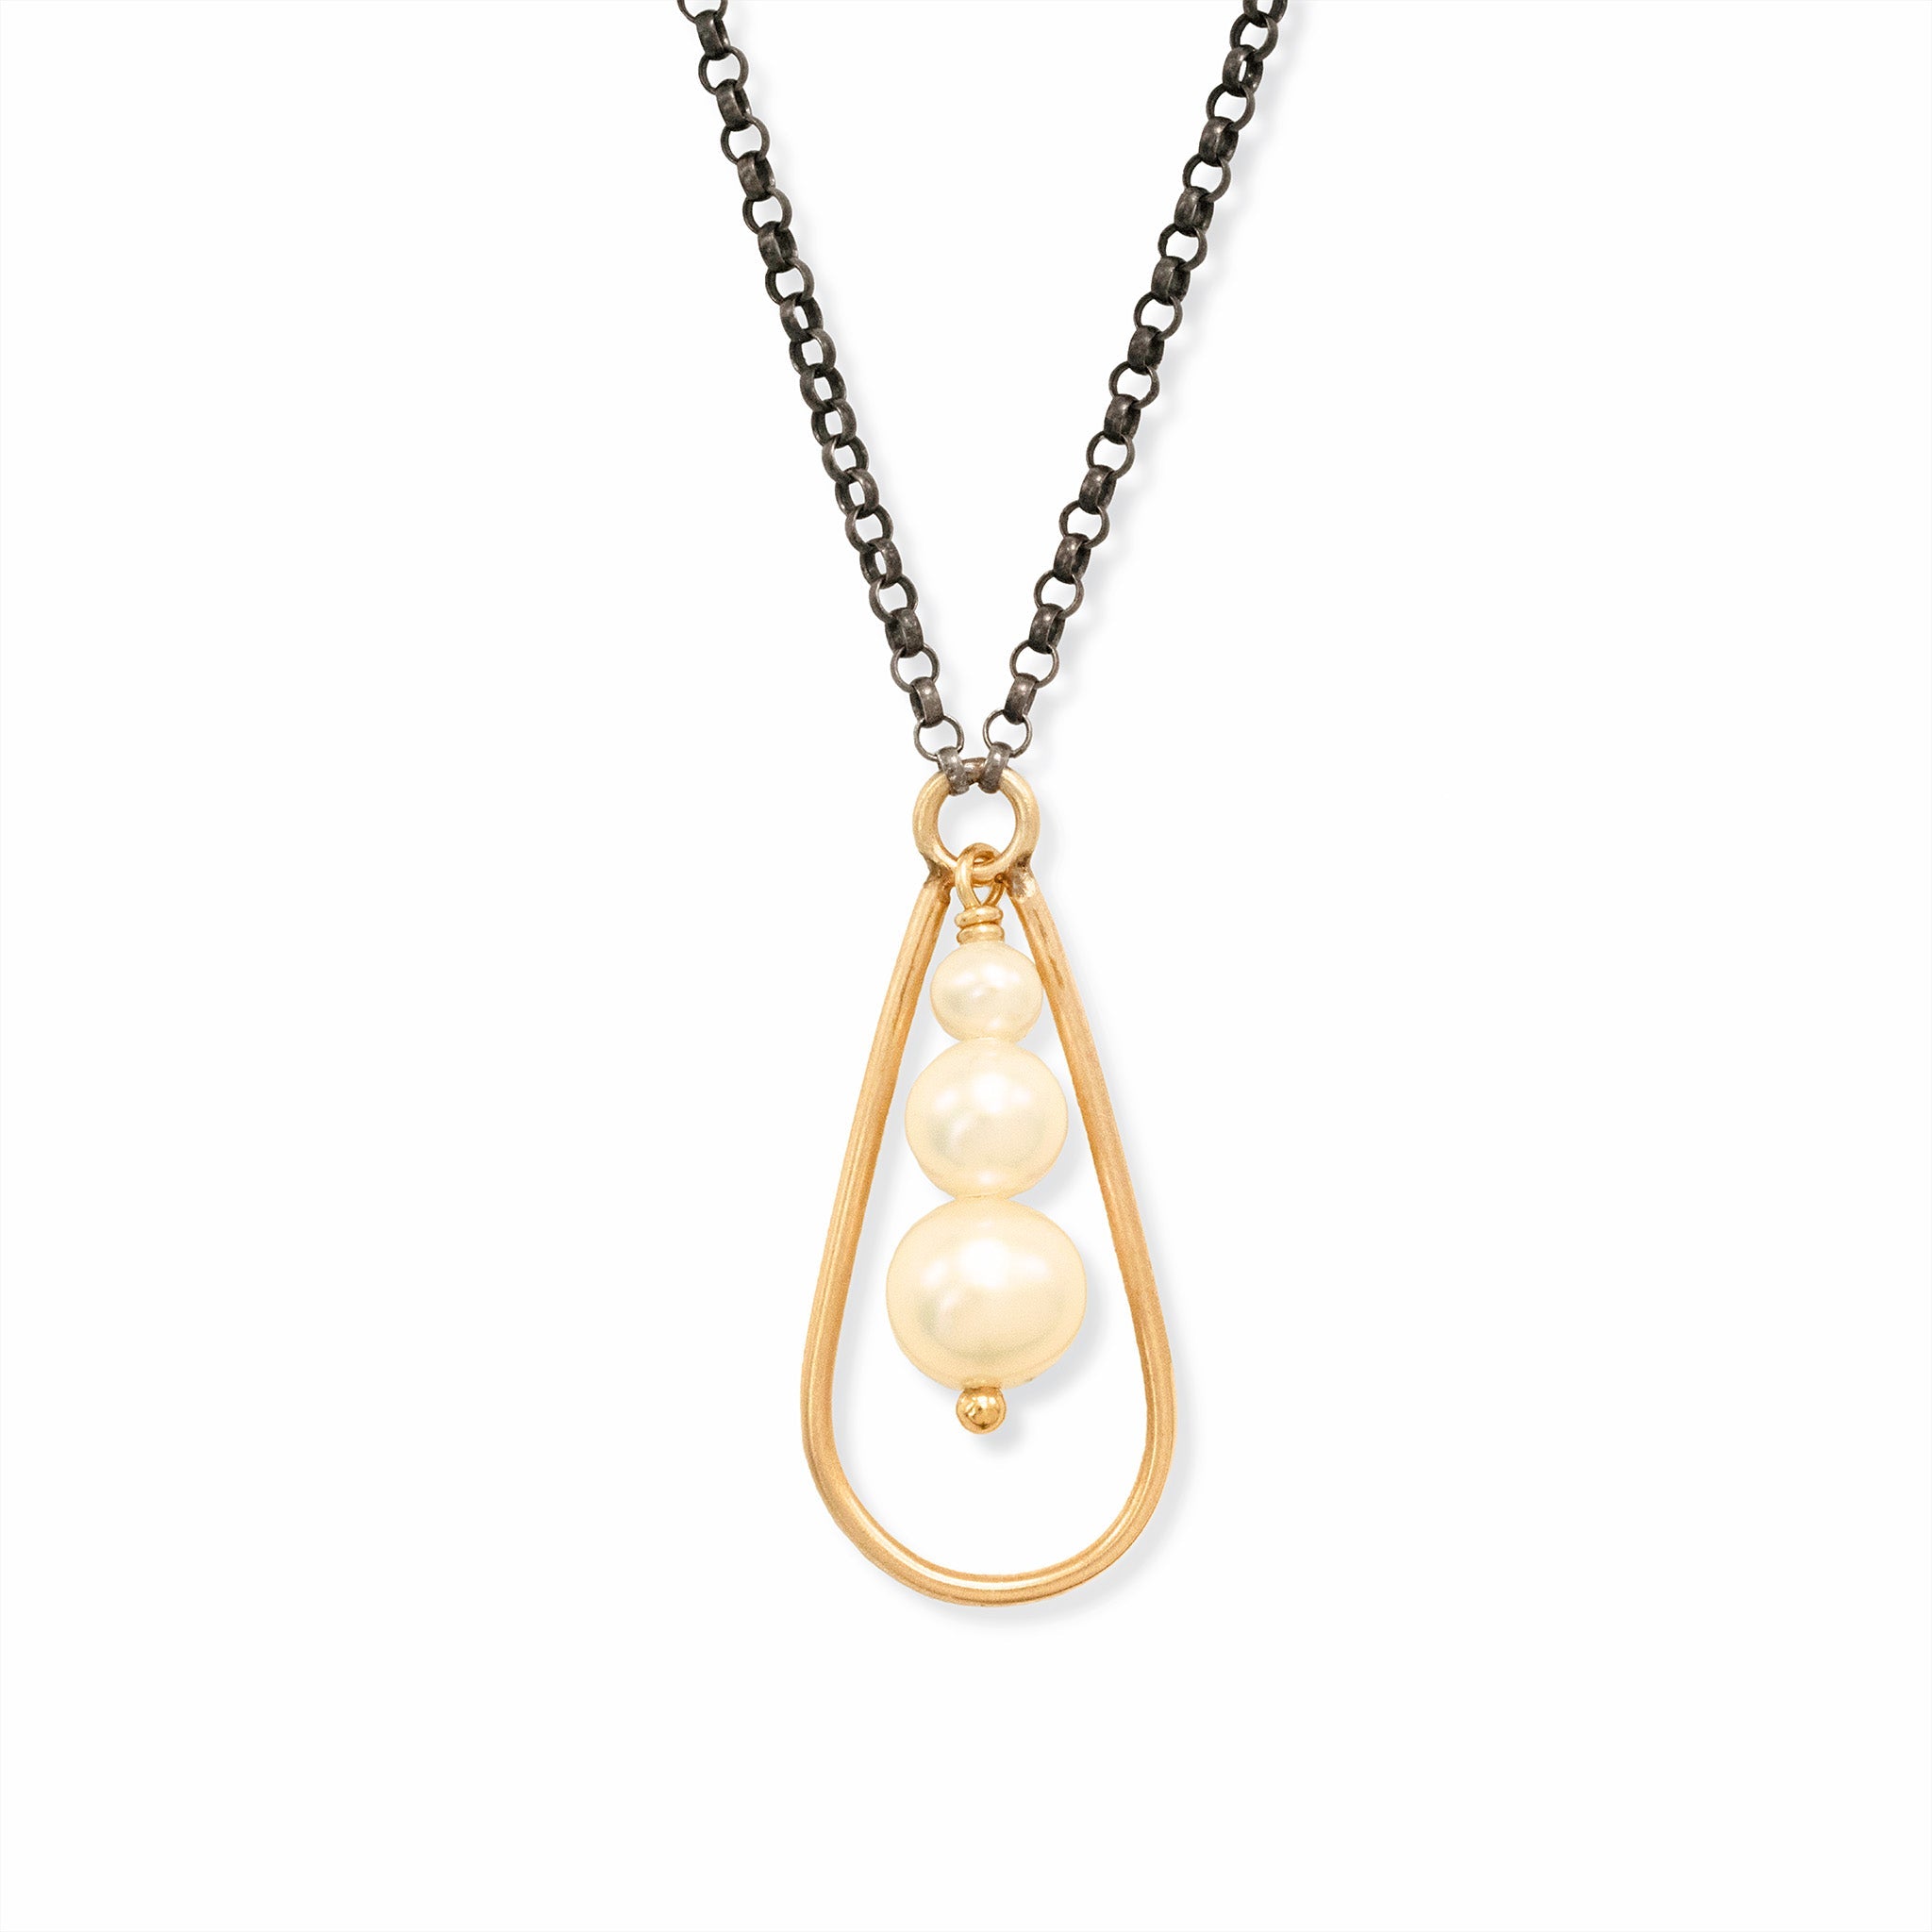 Pearl Trifecta Necklace - Necklaces